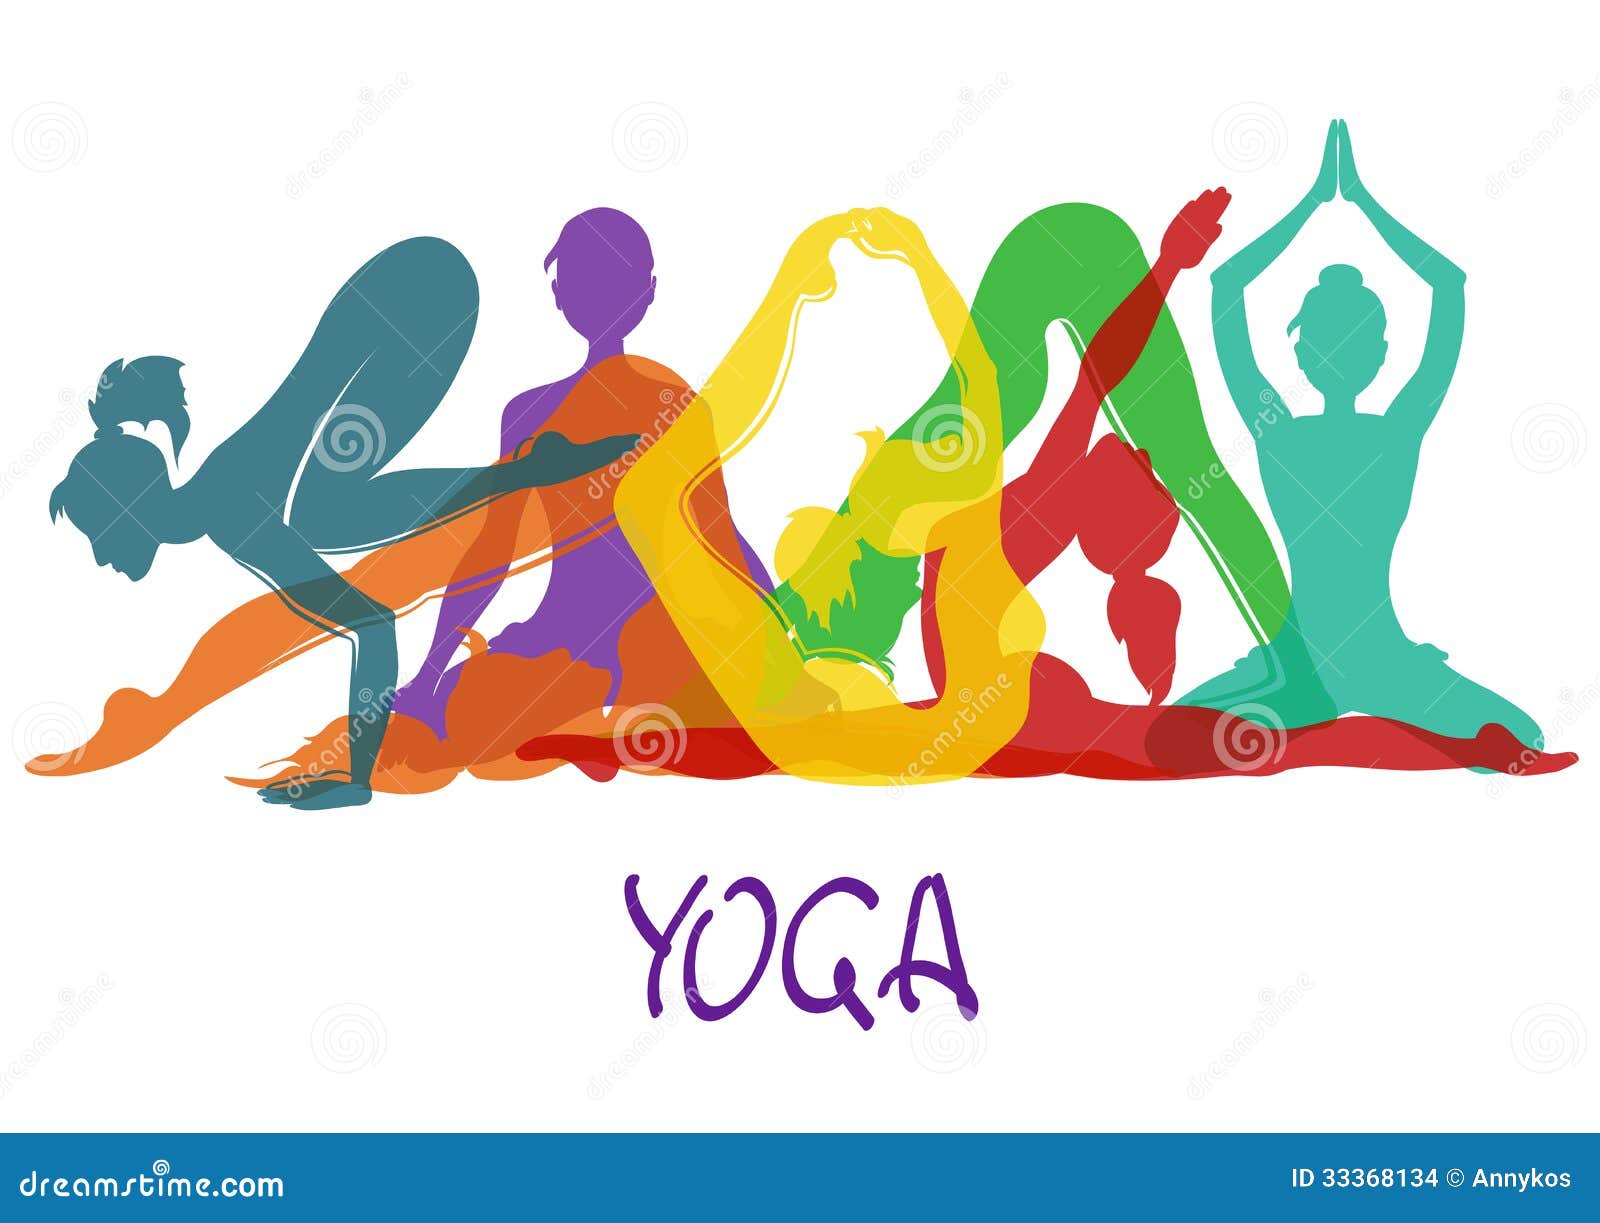 clipart of yoga poses - photo #40